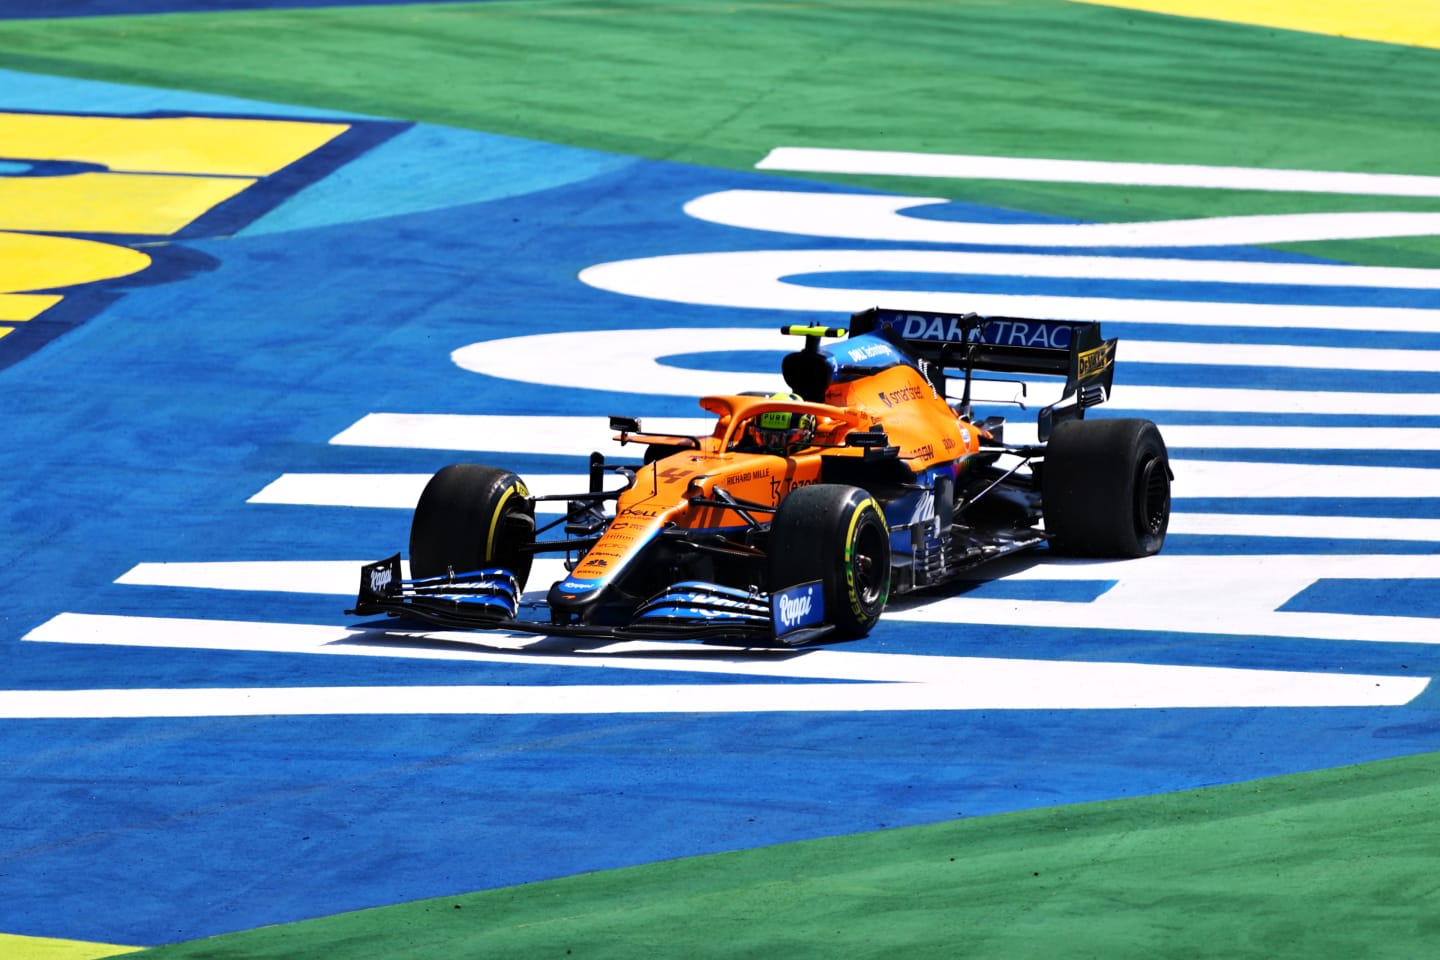 SAO PAULO, BRAZIL - NOVEMBER 14: Lando Norris of Great Britain driving the (4) McLaren F1 Team MCL35M Mercedes runs wide during the F1 Grand Prix of Brazil at Autodromo Jose Carlos Pace on November 14, 2021 in Sao Paulo, Brazil. (Photo by Bryn Lennon - Formula 1/Formula 1 via Getty Images)